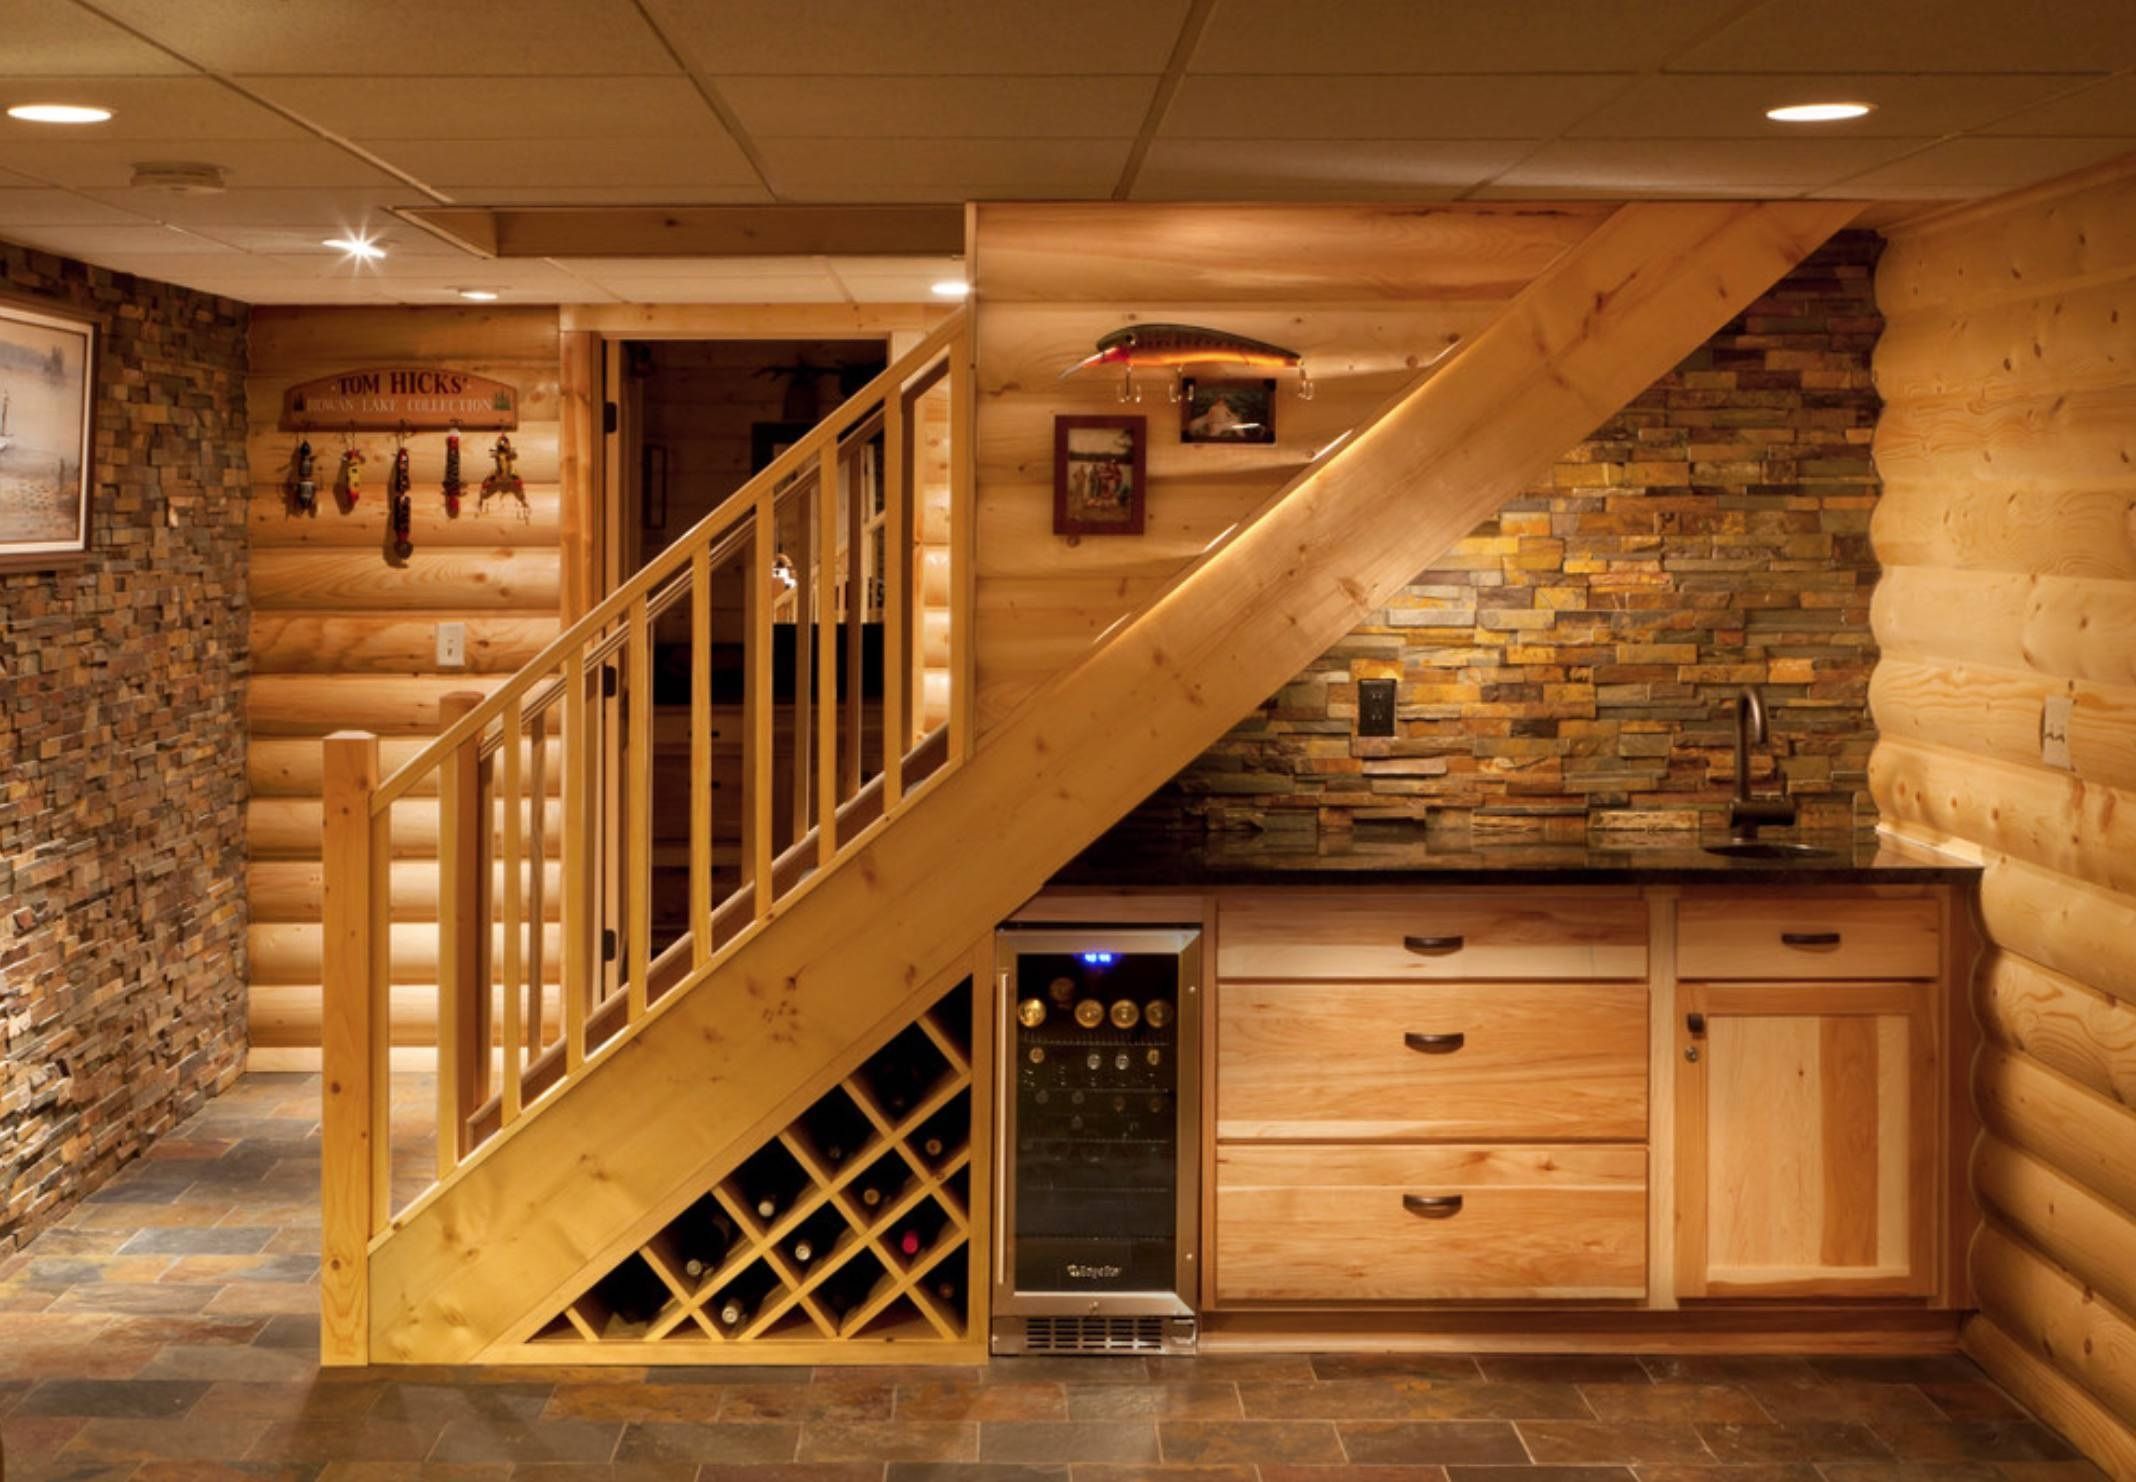 An under-the-stairs basement wet bar design with open shelving and a wine bar.